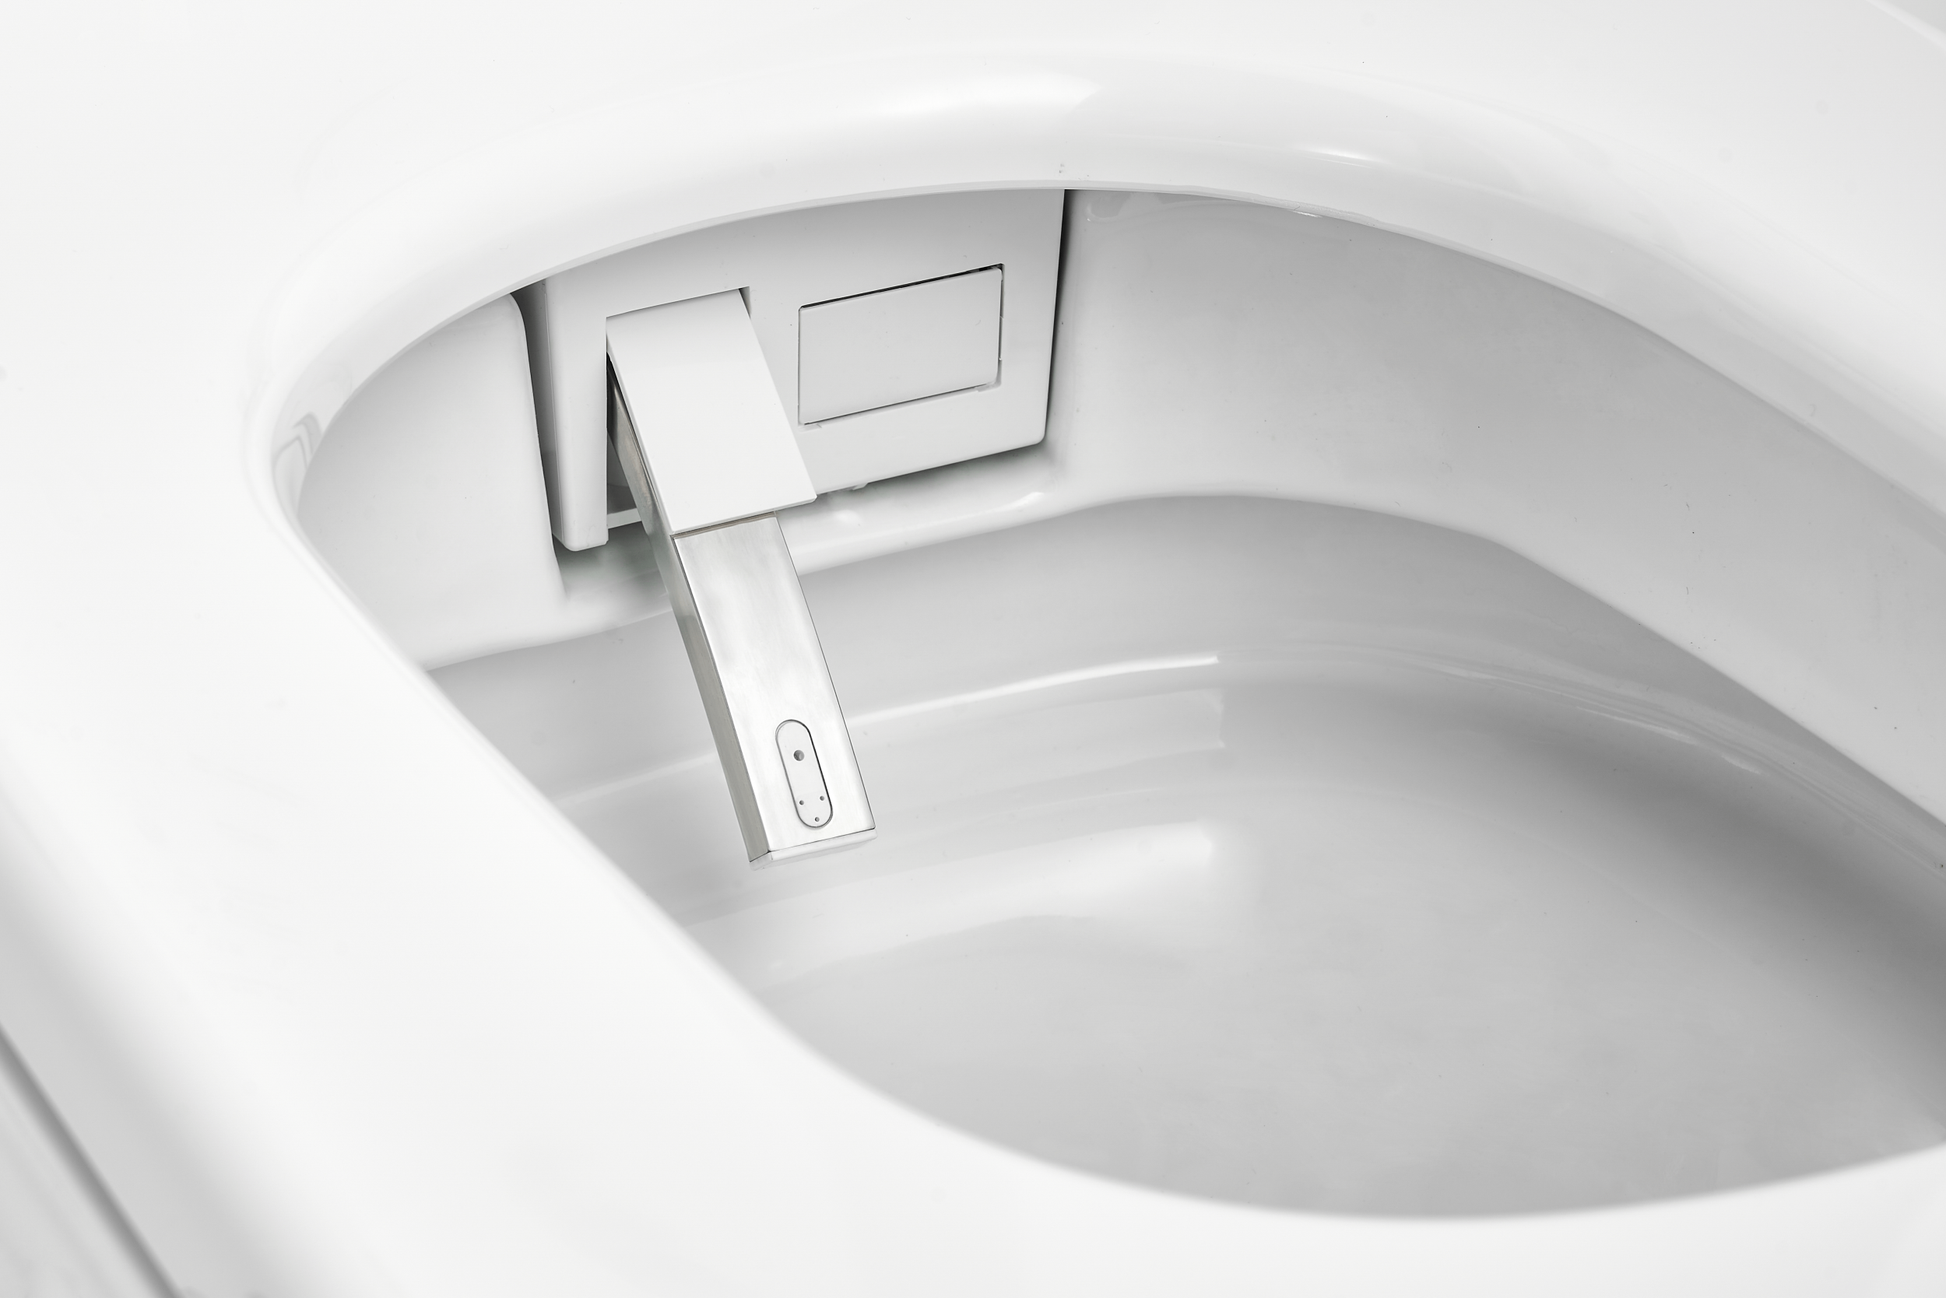 Multifunctional flat square smart toilet with gold-ceramic